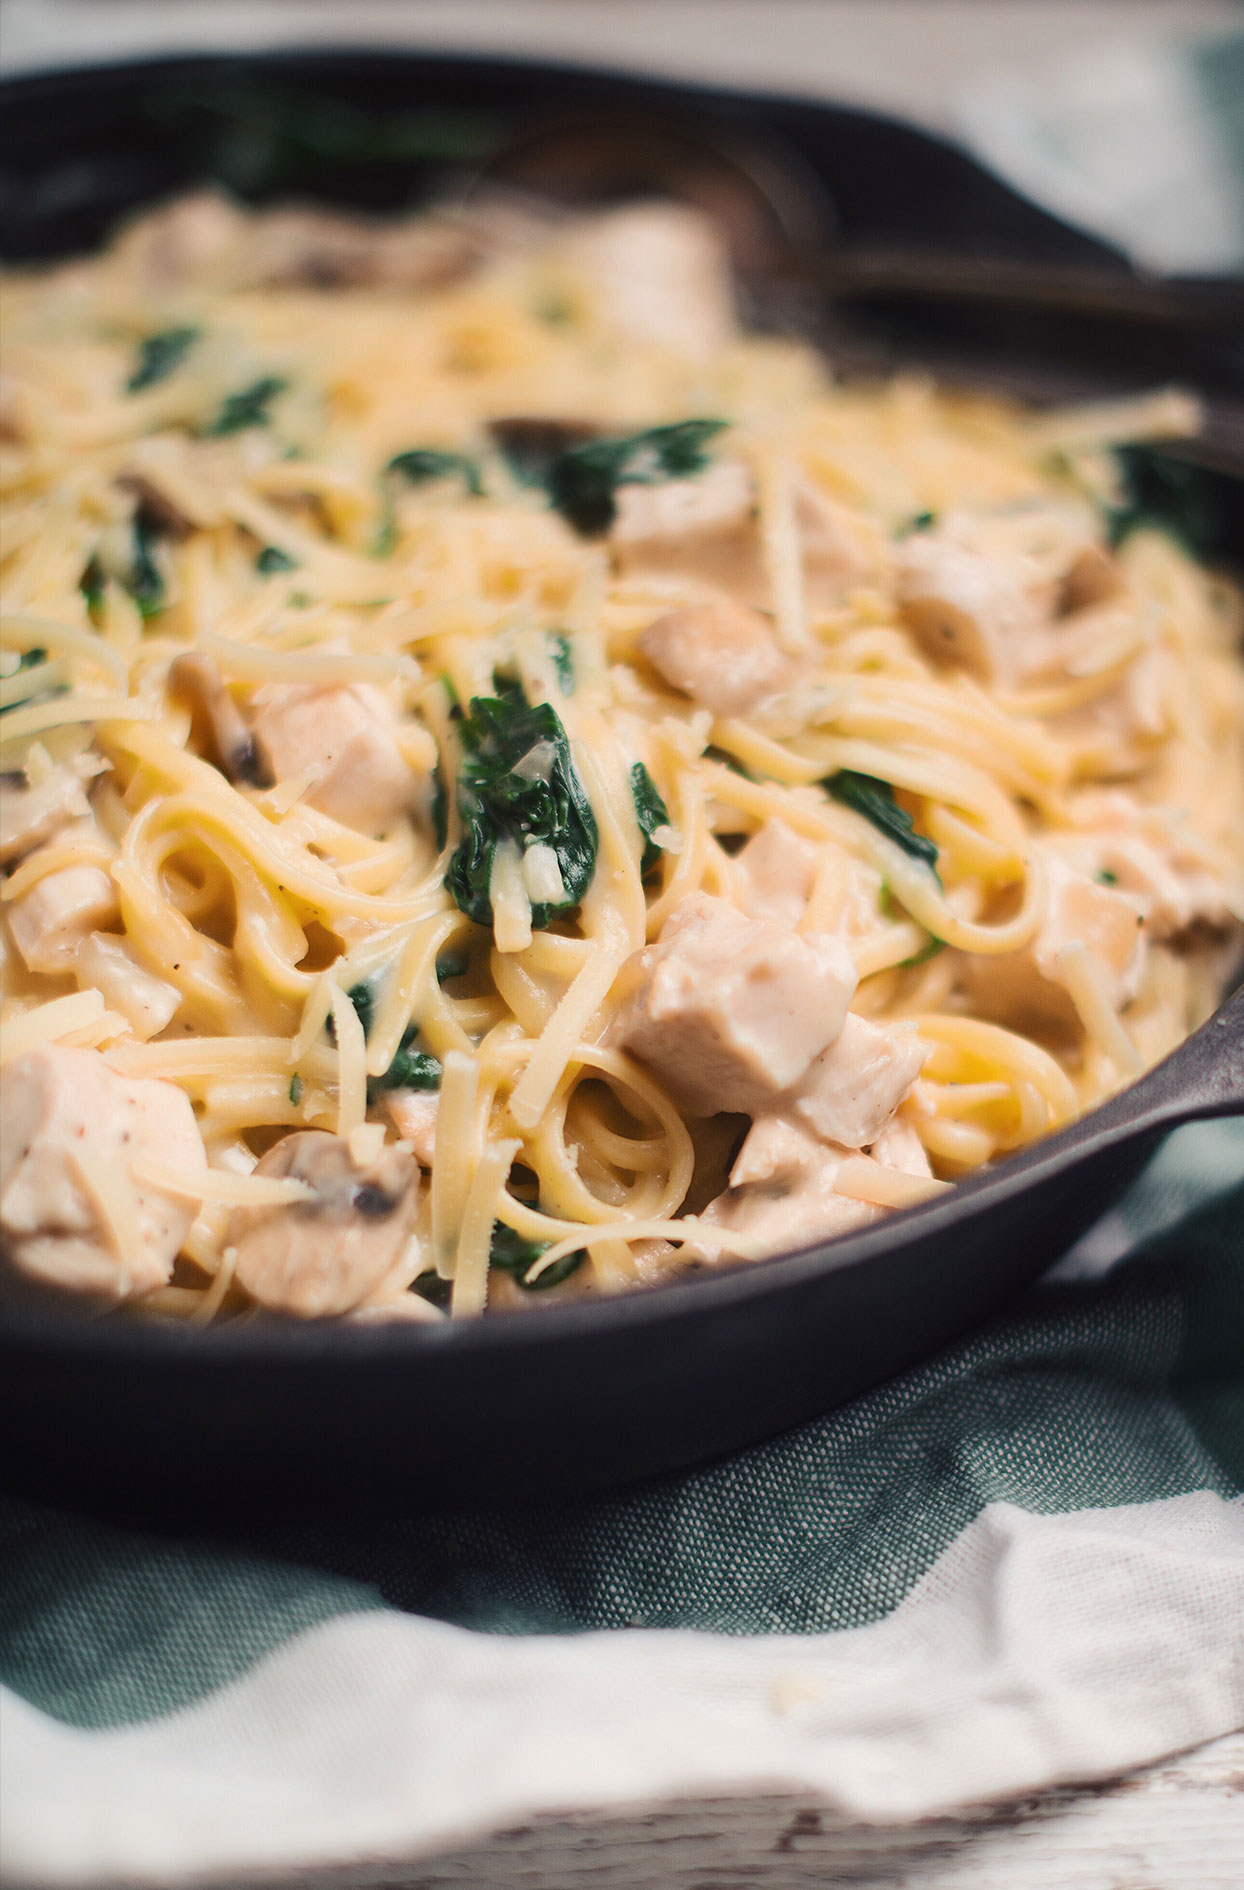 Creamy pasta with ranch chicken, mushrooms and spinach